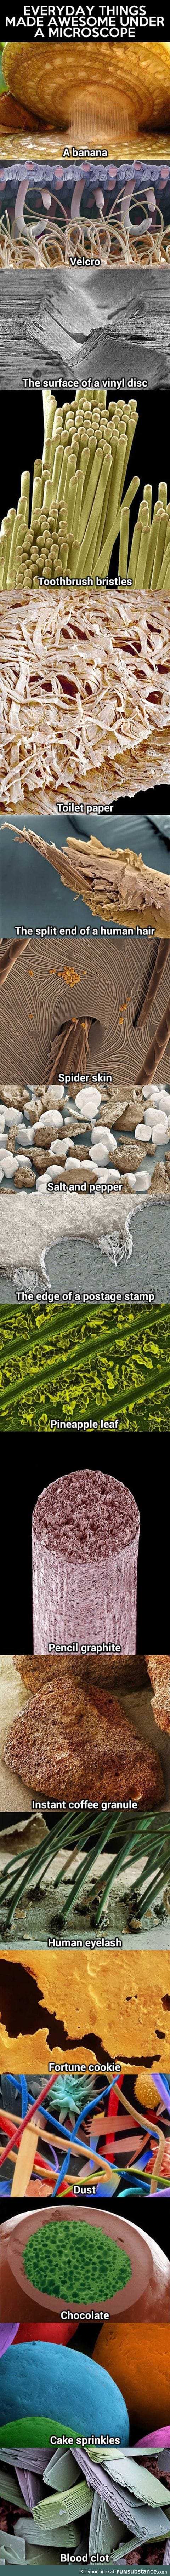 Everyday things under a microscope